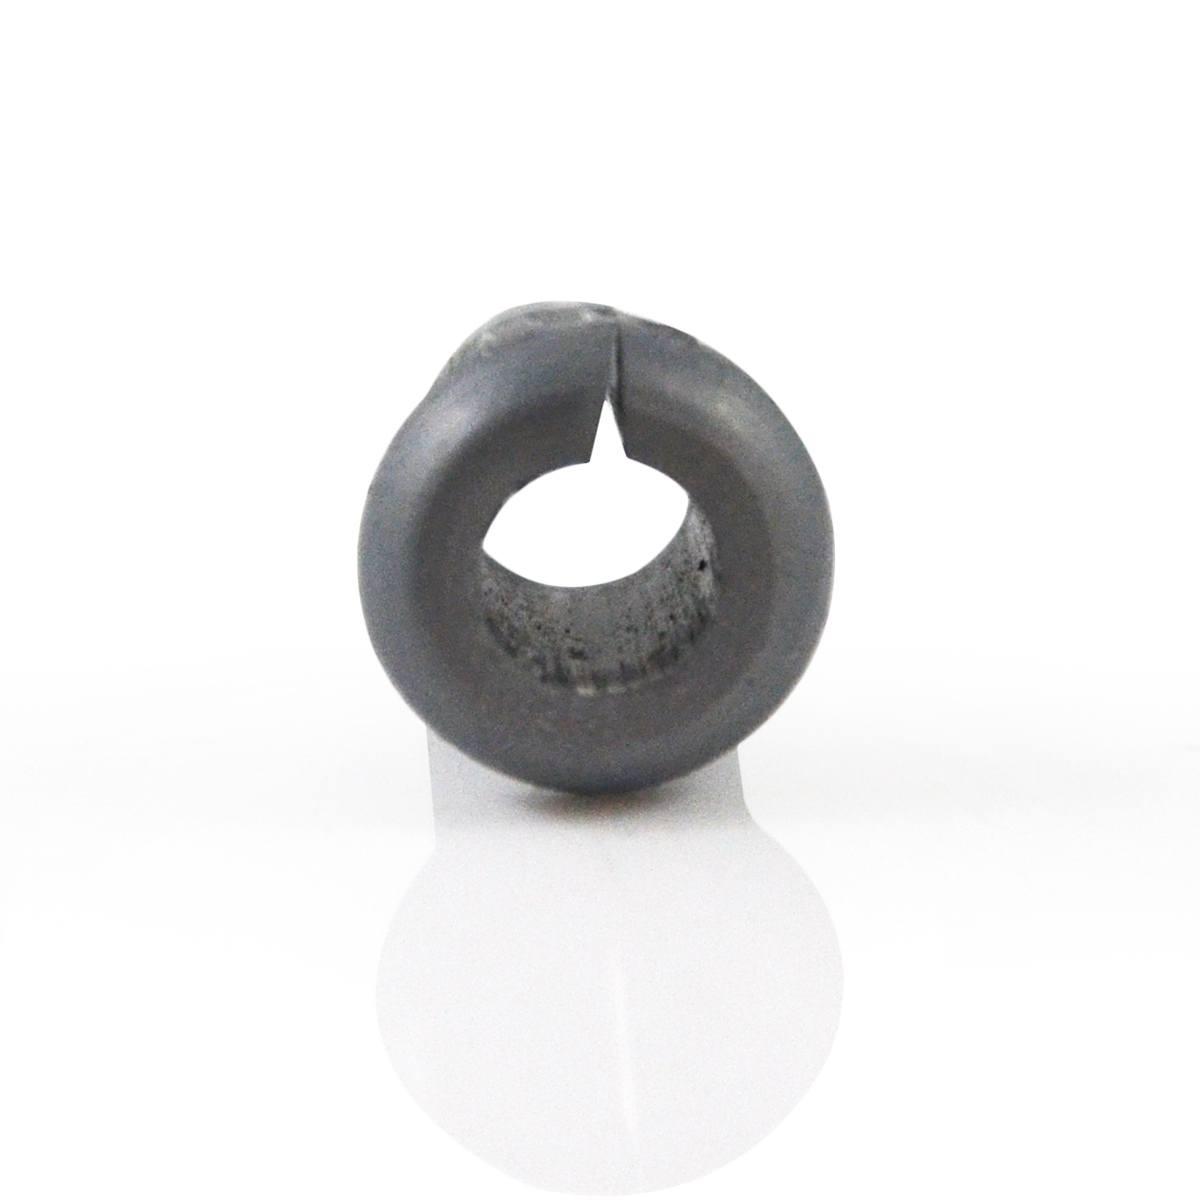 Nylon Grommets for 3.2 - 5mm Wire (Grey)